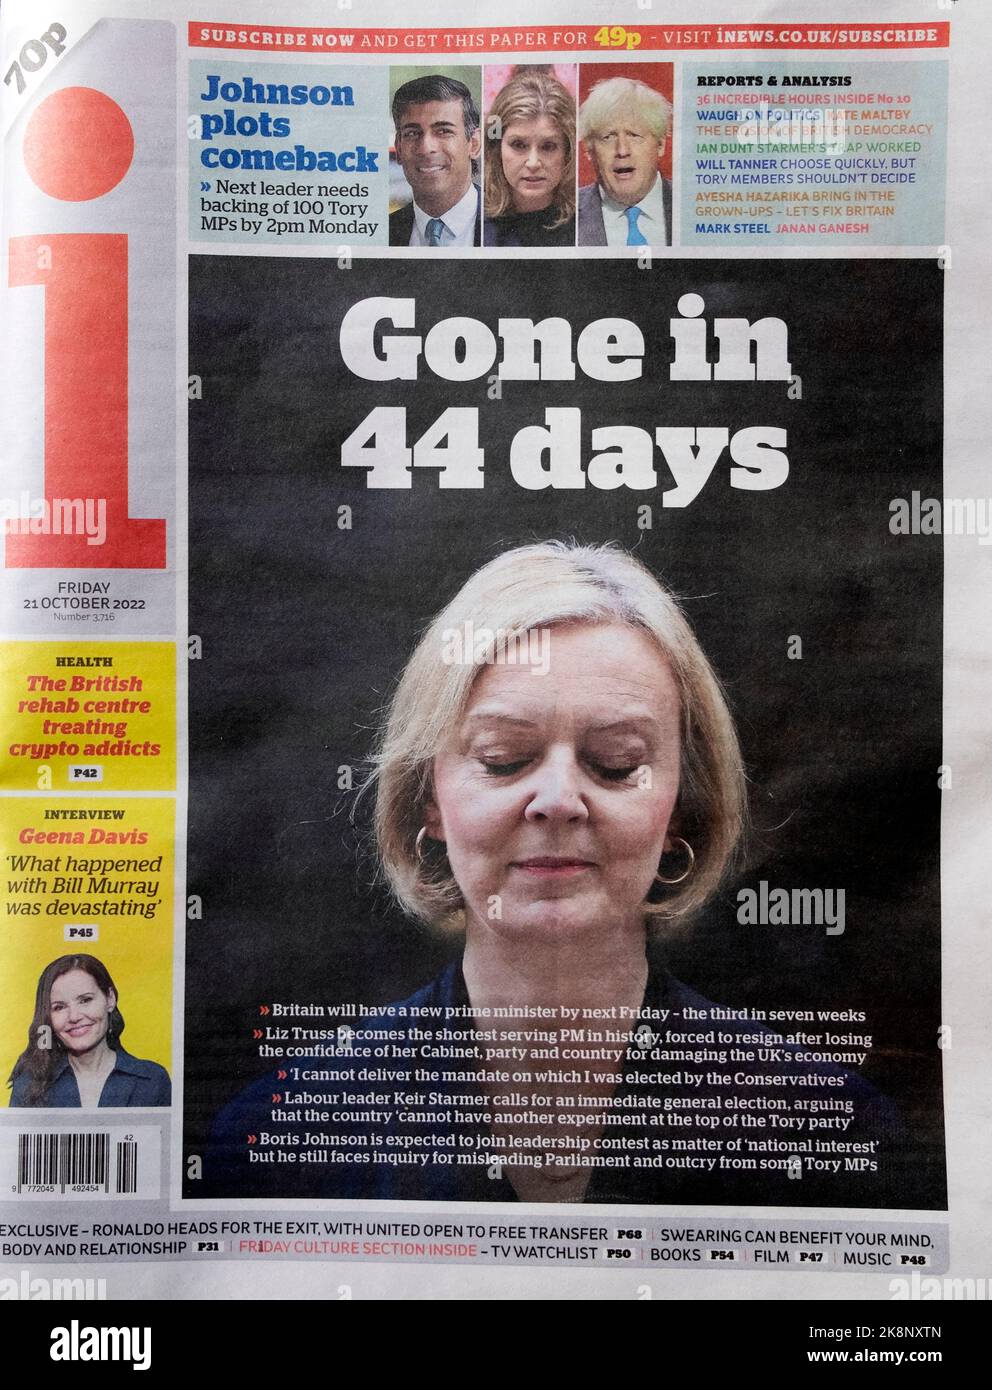 Female woman British Prime Minister PM Liz Truss 'Gone in 44 days' i newspaper front page 21 October 2022 London England Great Britain UK Stock Photo